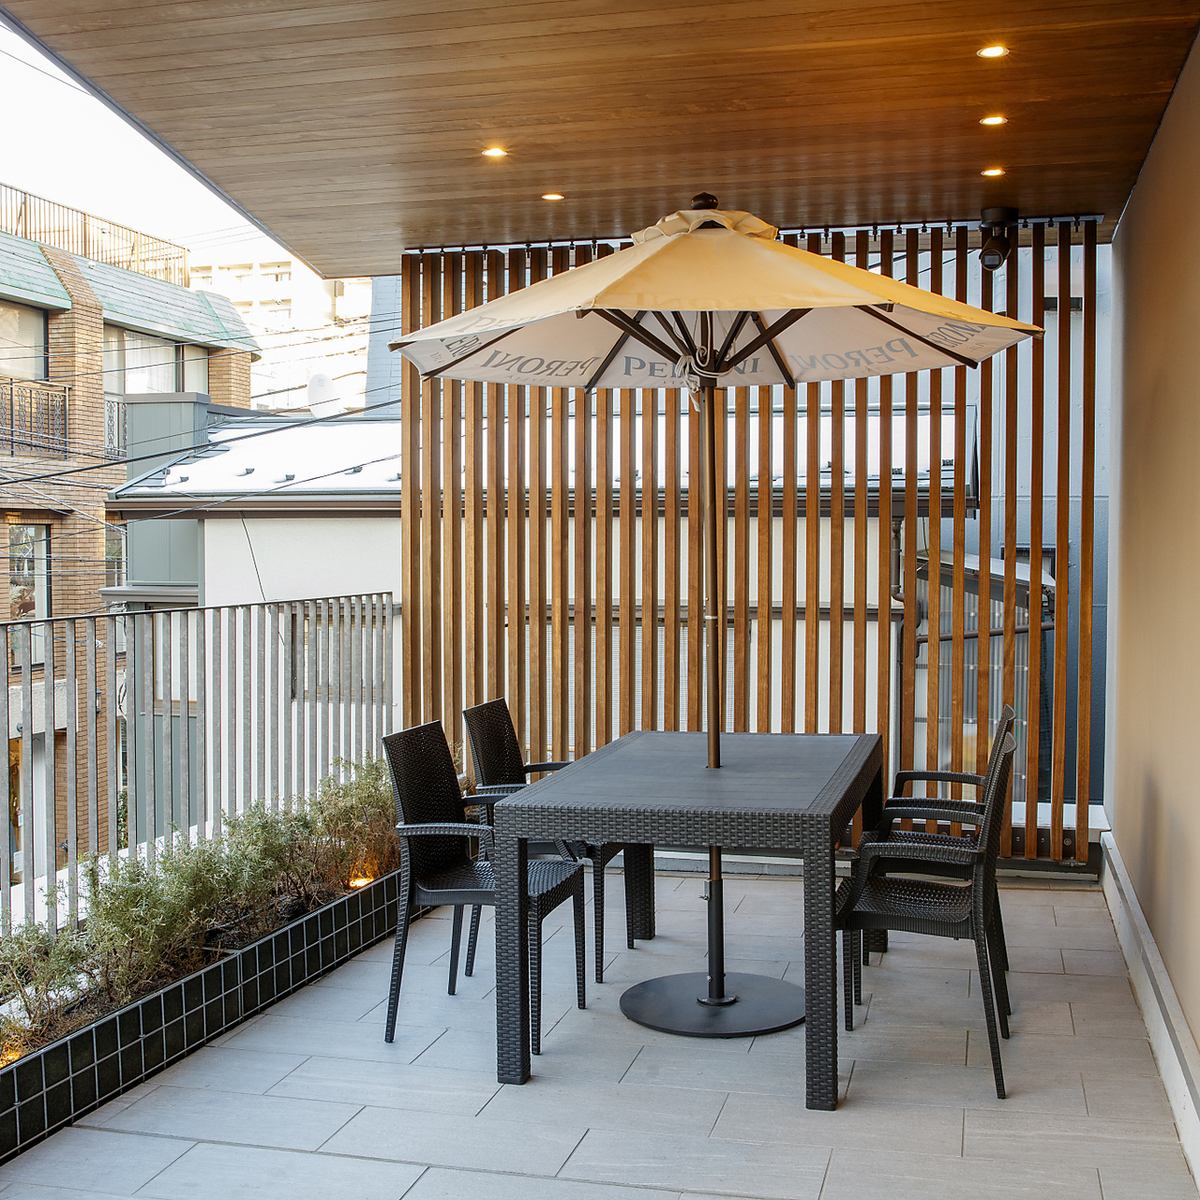 We also have an open terrace seating area. Enjoy a toast while enjoying the cool breeze.